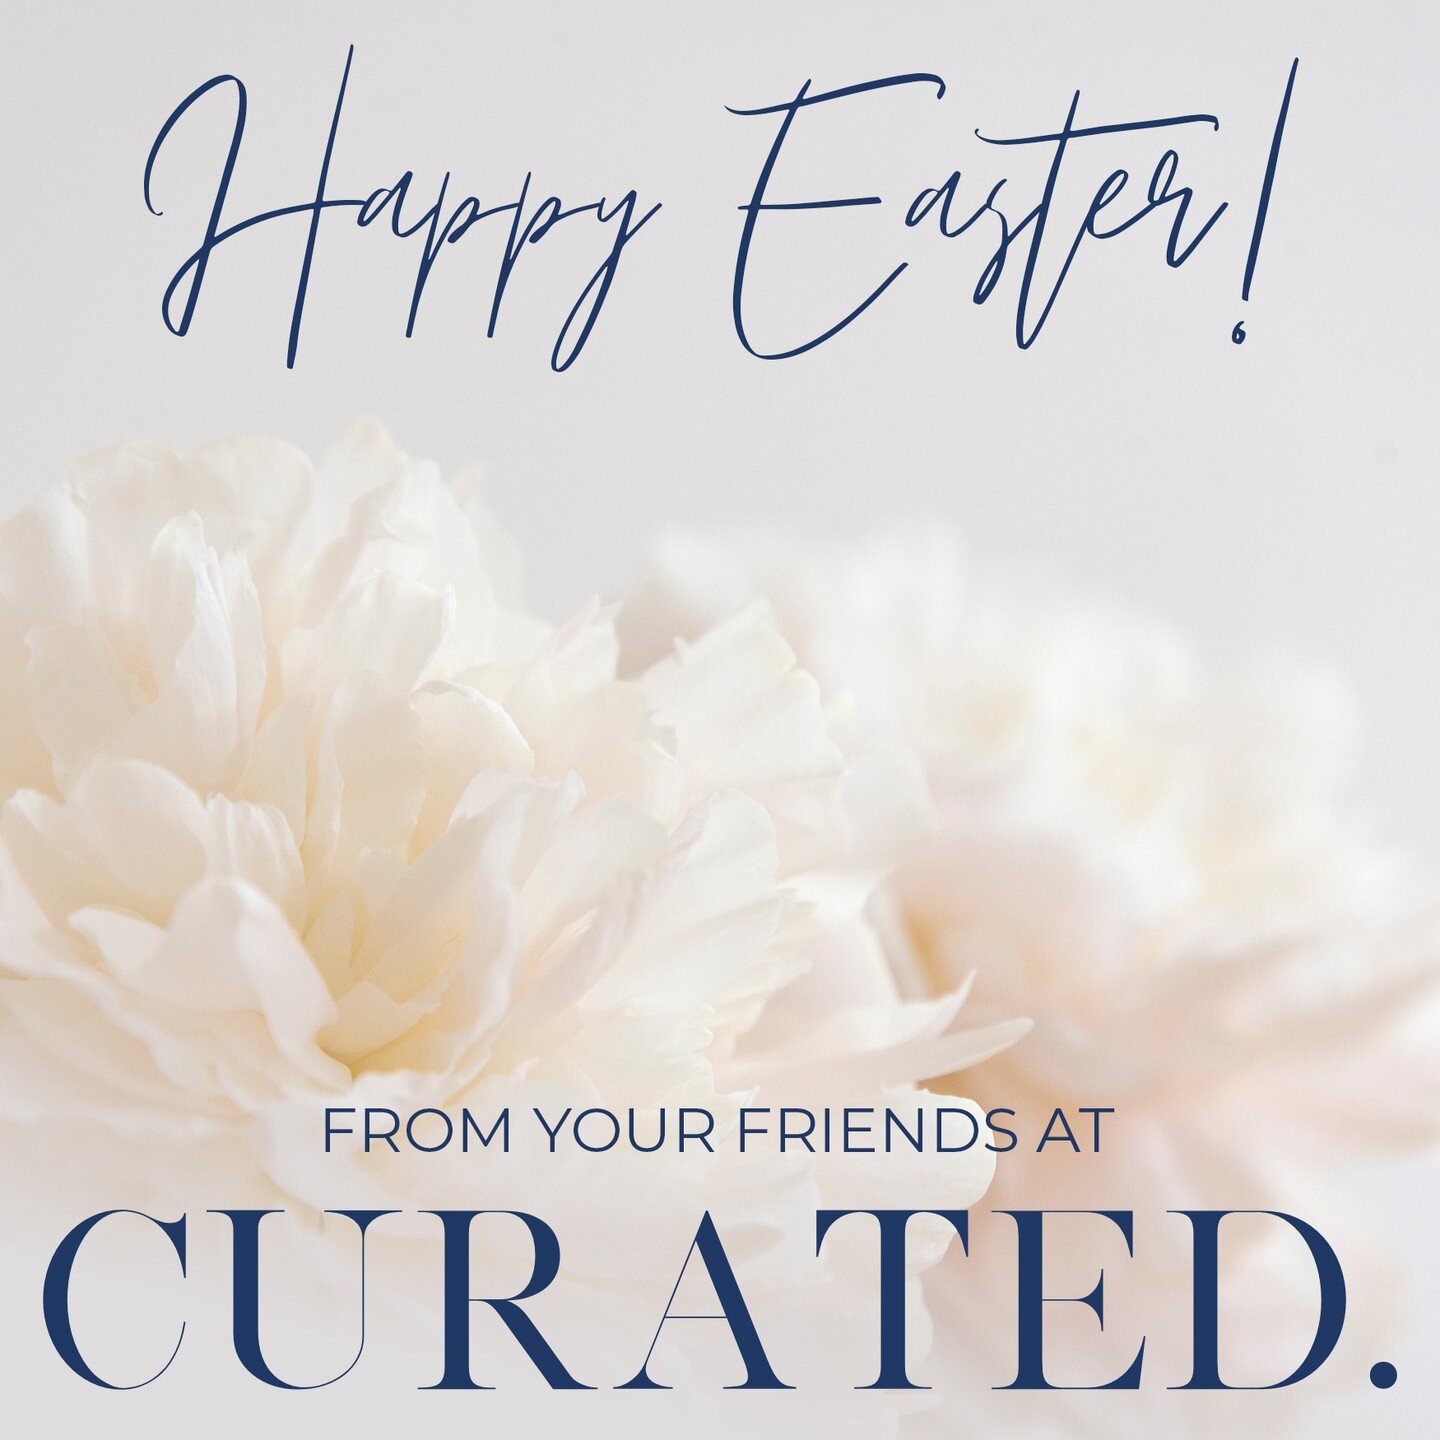 As the spirit of Easter and the change of seasons touch our lives, our team at CURATED. sends heartfelt blessings to our cherished friends and valued clients. Whether you celebrate with joyous traditions or quiet reflection, may this weekend bring yo